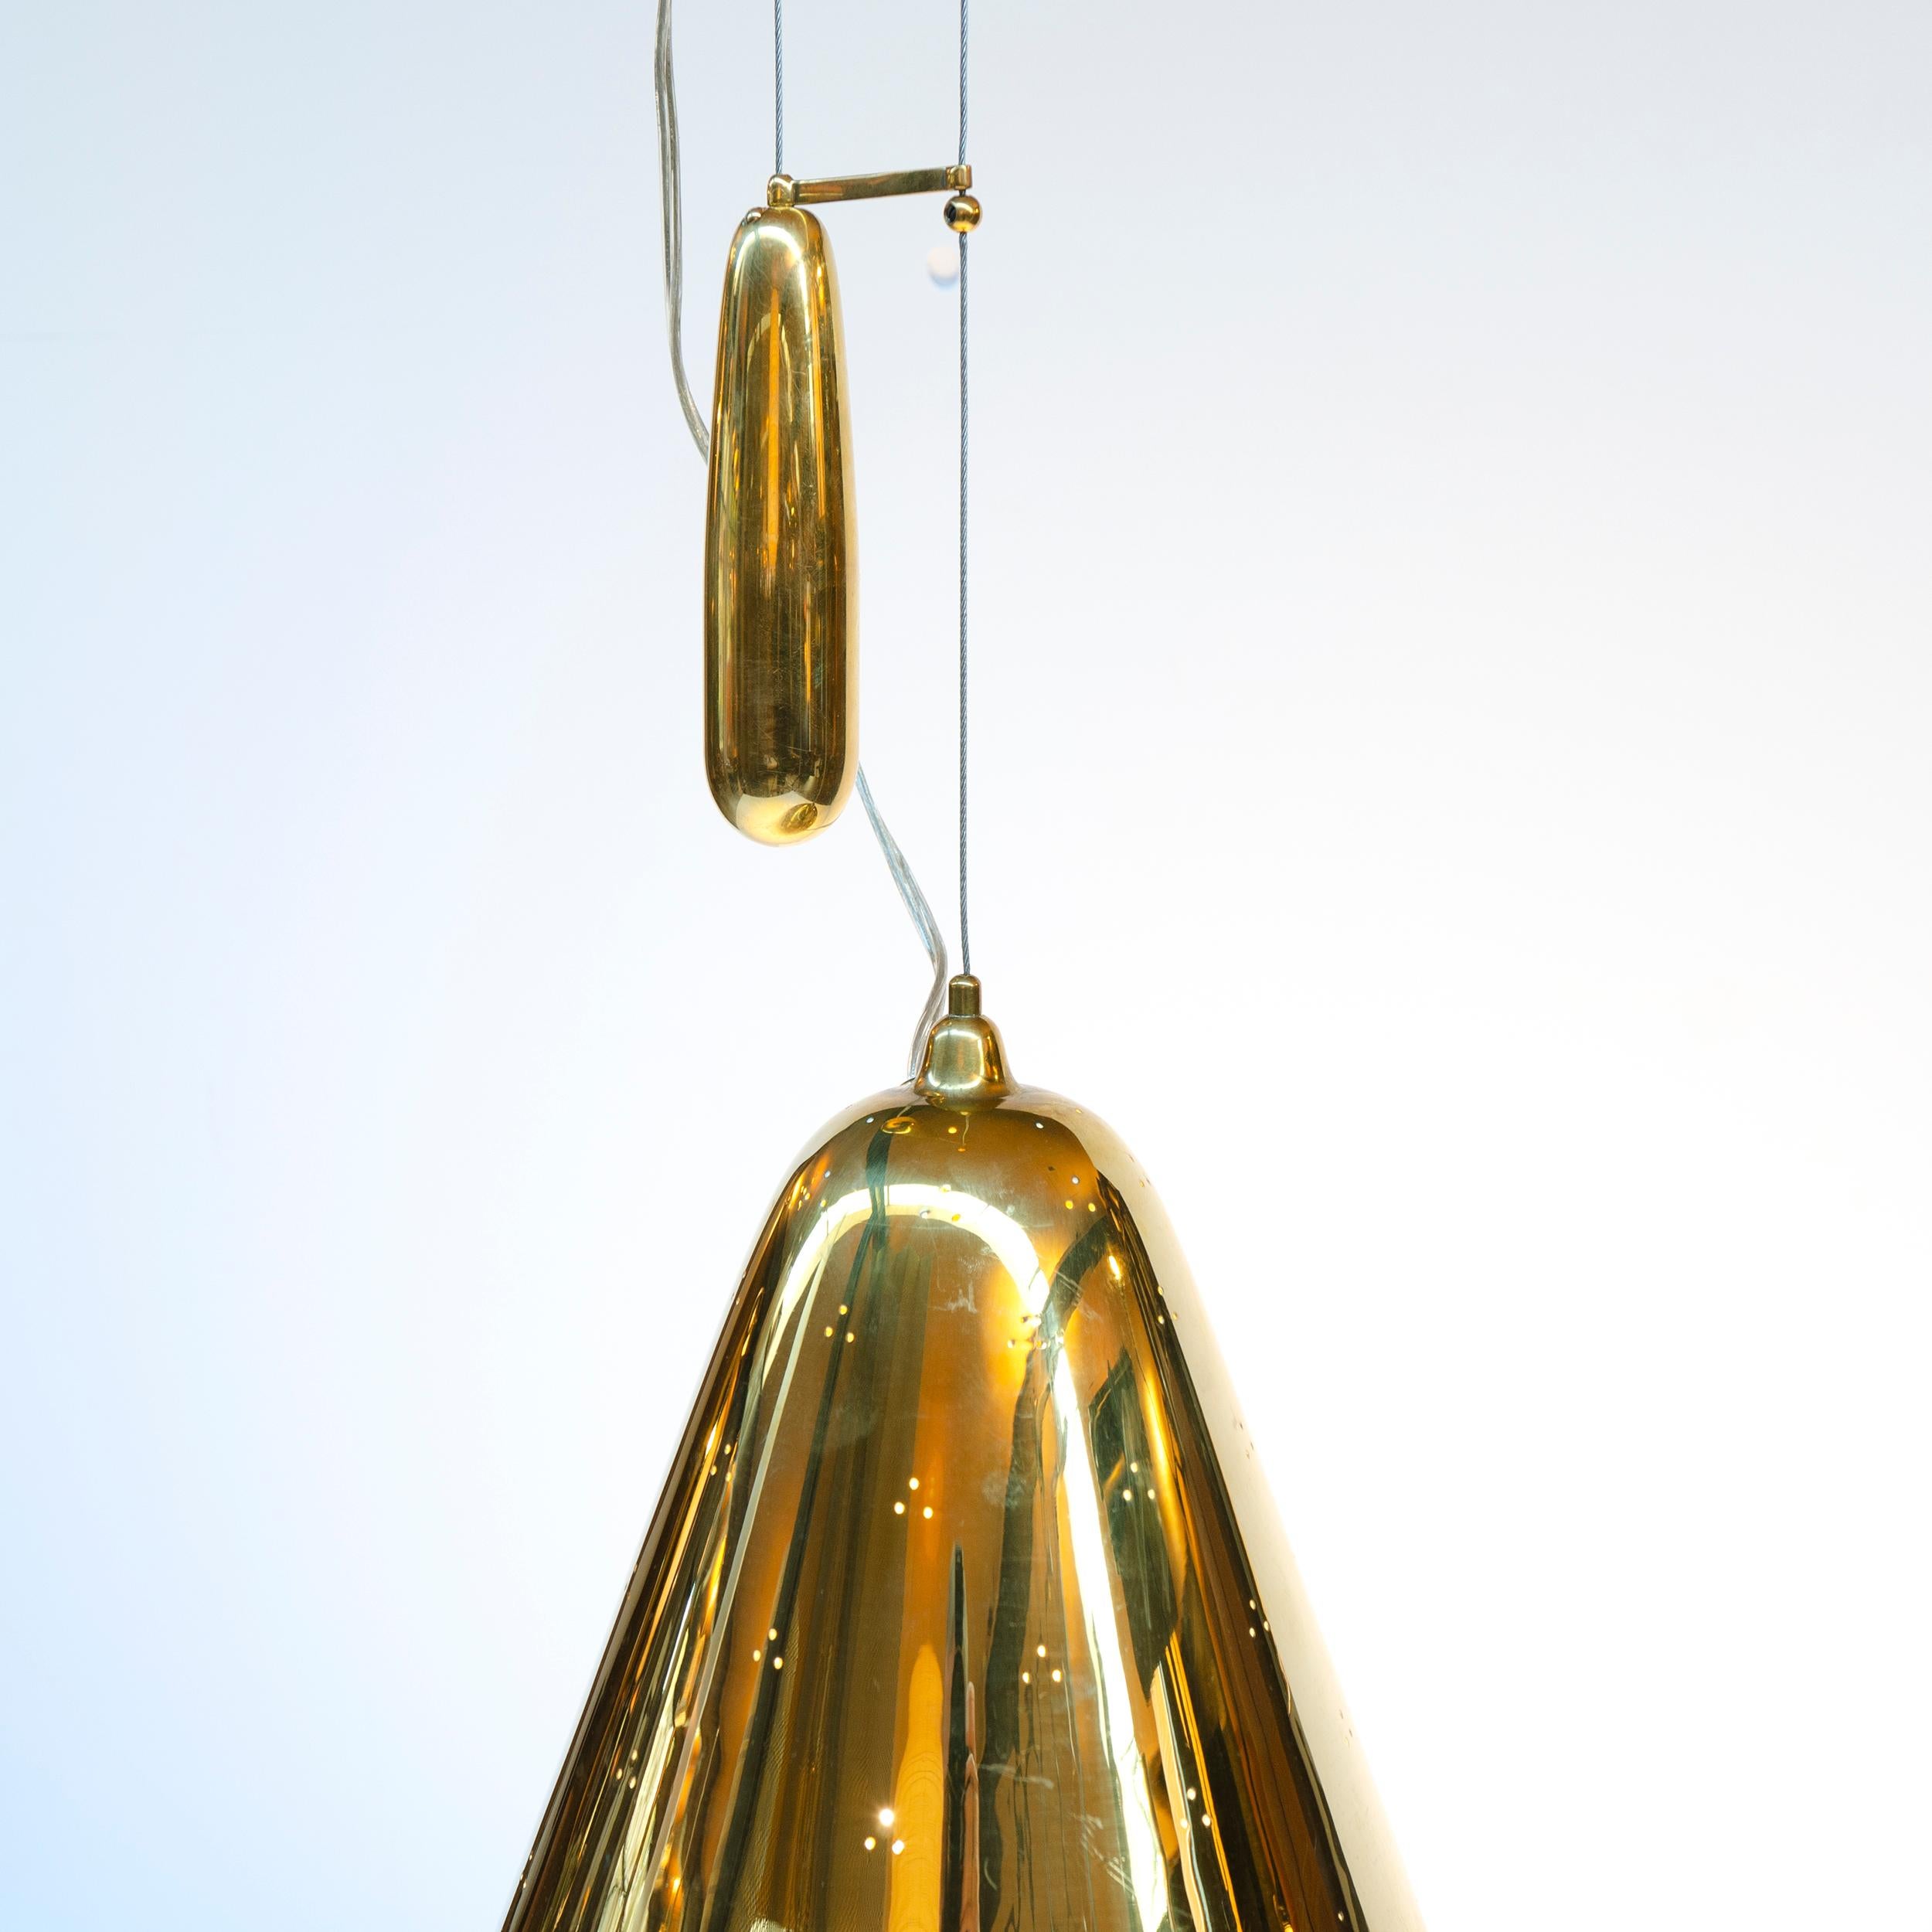 Scandinavian Modern 1950s Finnish Counterweighted Brass Pendant Light by Paavo Tynell for Taito Oy